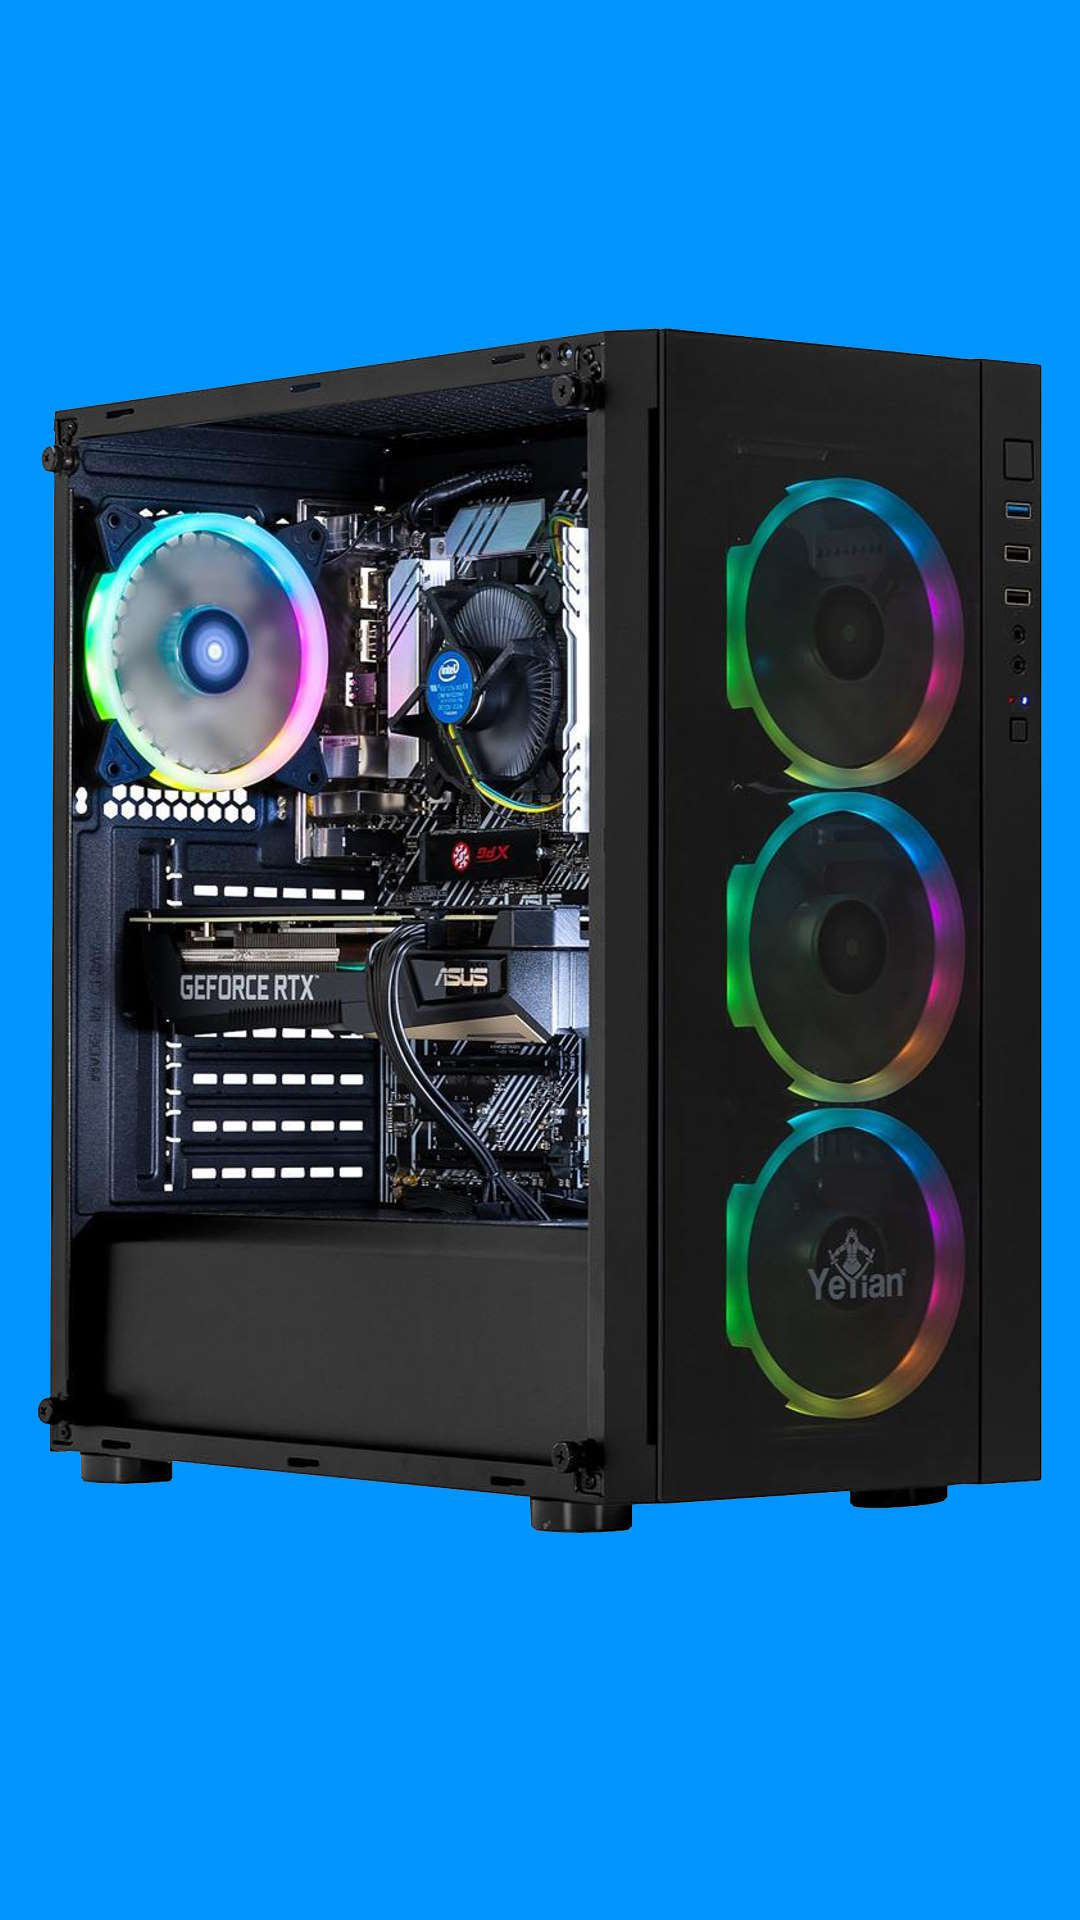 ᐅ Buy an affordable Gaming PC – The ultimate PC provider